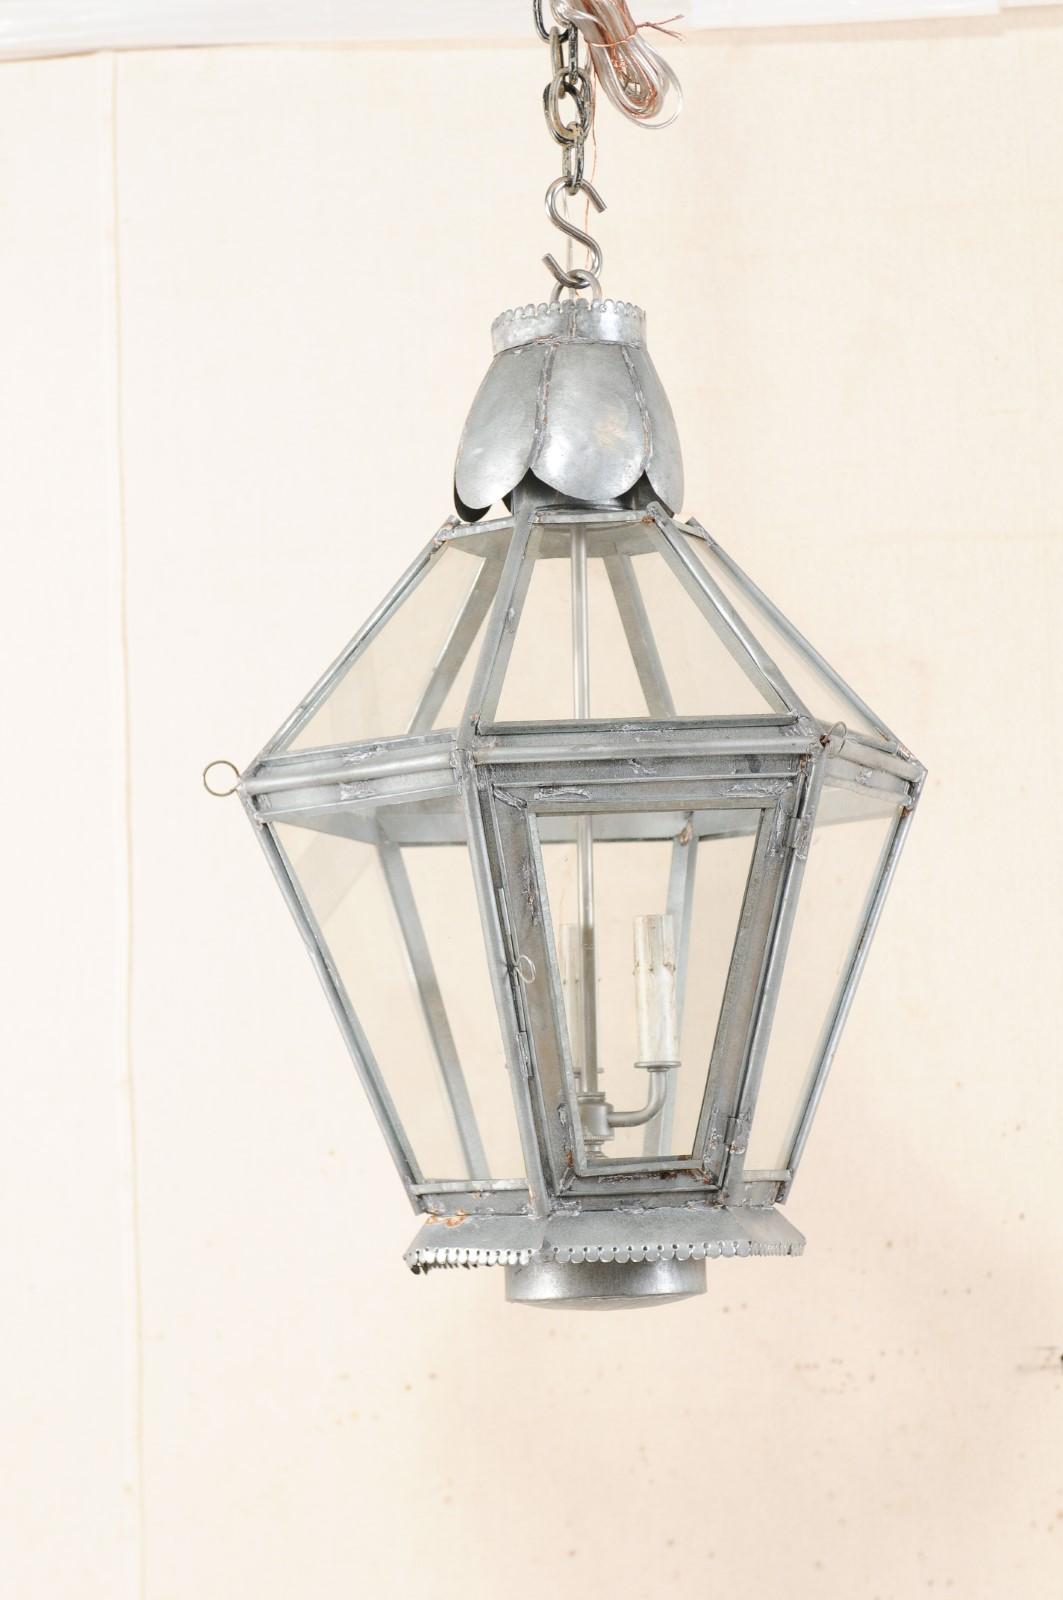 A pair of vintage hanging lanterns with three lights at center. Each lantern has a primarily hexagon-shaped body, with glass windows set within the silver metal frame which houses three lights topped with painted candle covers at their centers. A